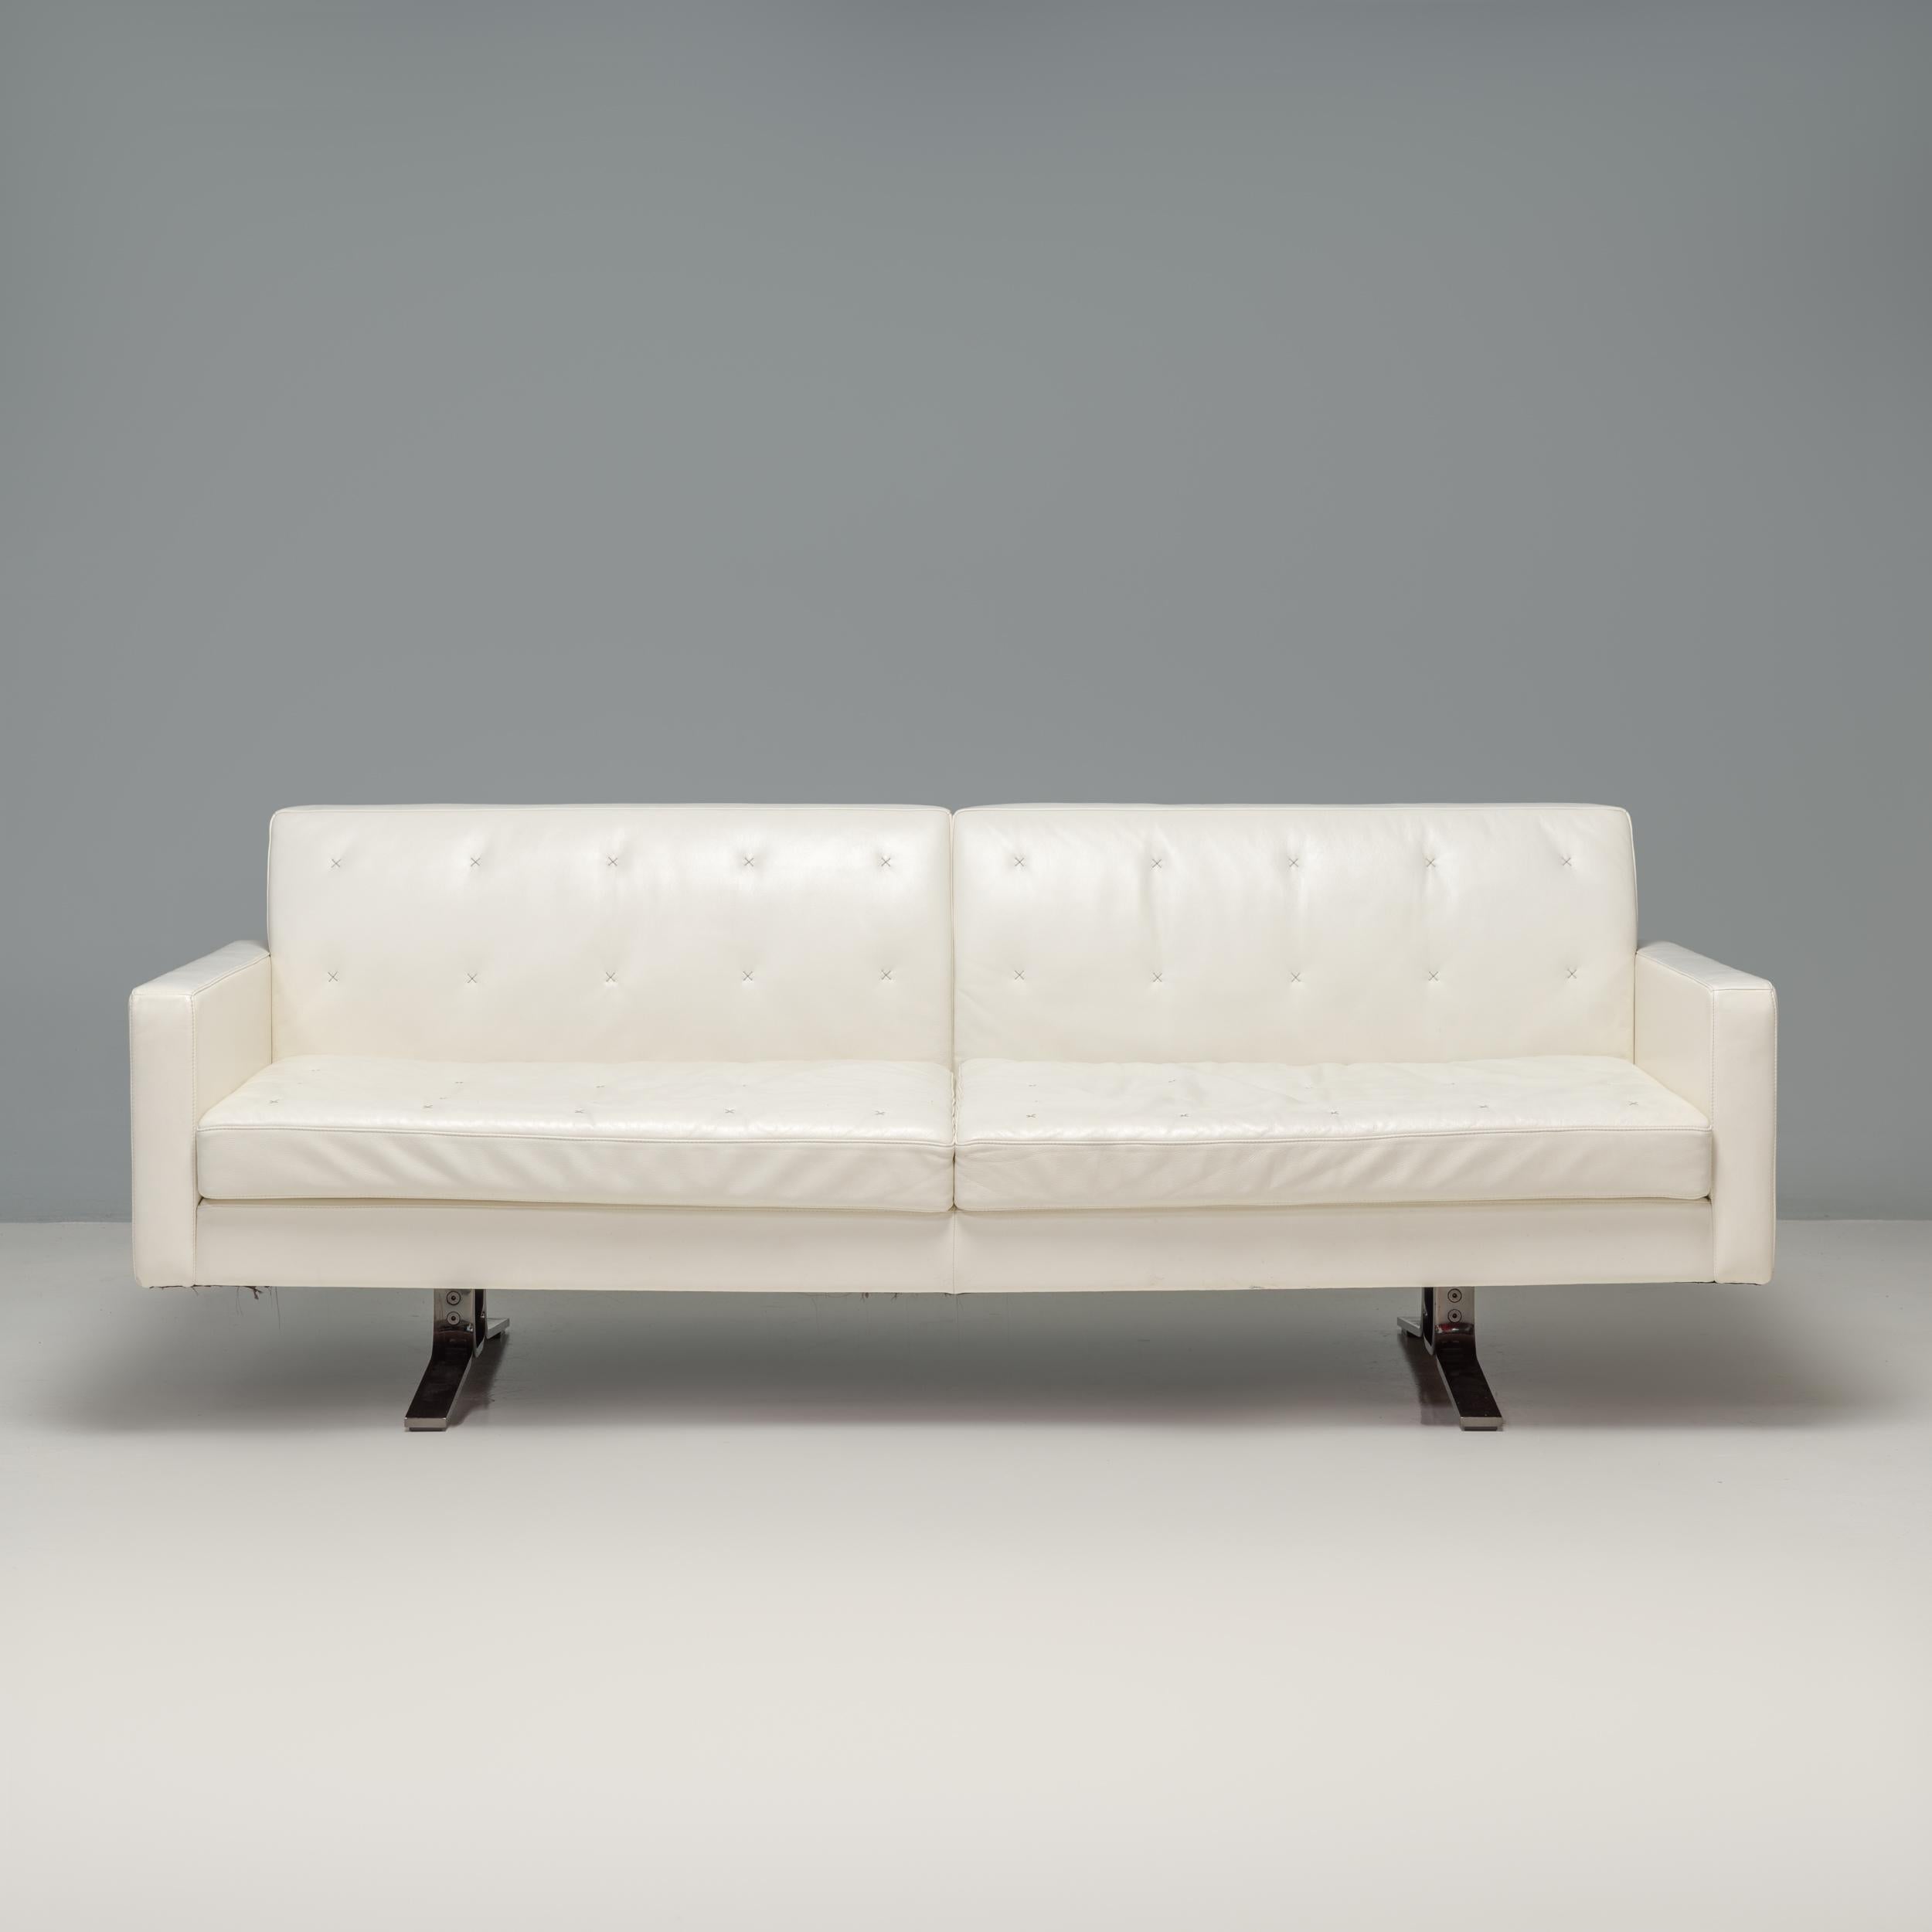 Originally designed by Jean-Marie Massaud for Poltrona Frau in 2006, the Kennedee sofa is a fantastic example of modern Italian design.

Constructed from a solid beechwood frame, the sofa is fully upholstered in white Panna 51 Pelle Frau SC